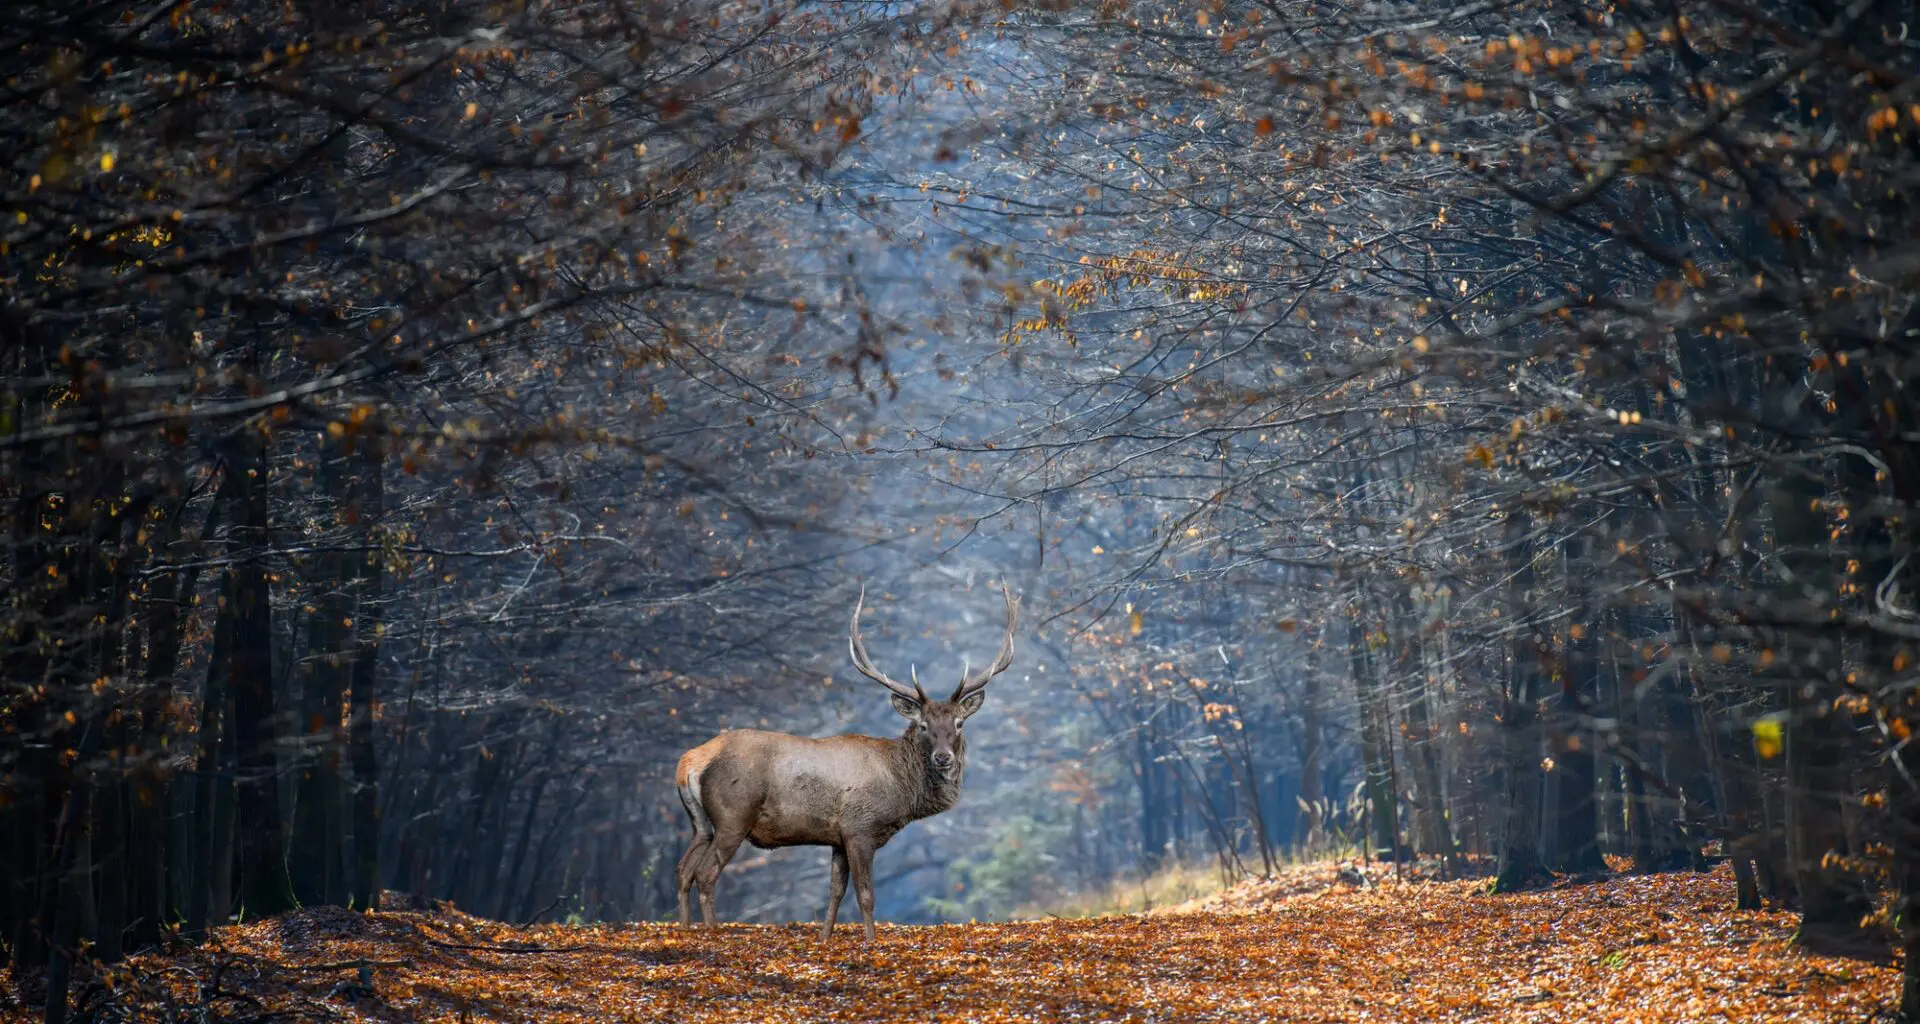 A deer with large antlers stands on a leaf-covered path in the woods, representing a scene of wildlife.